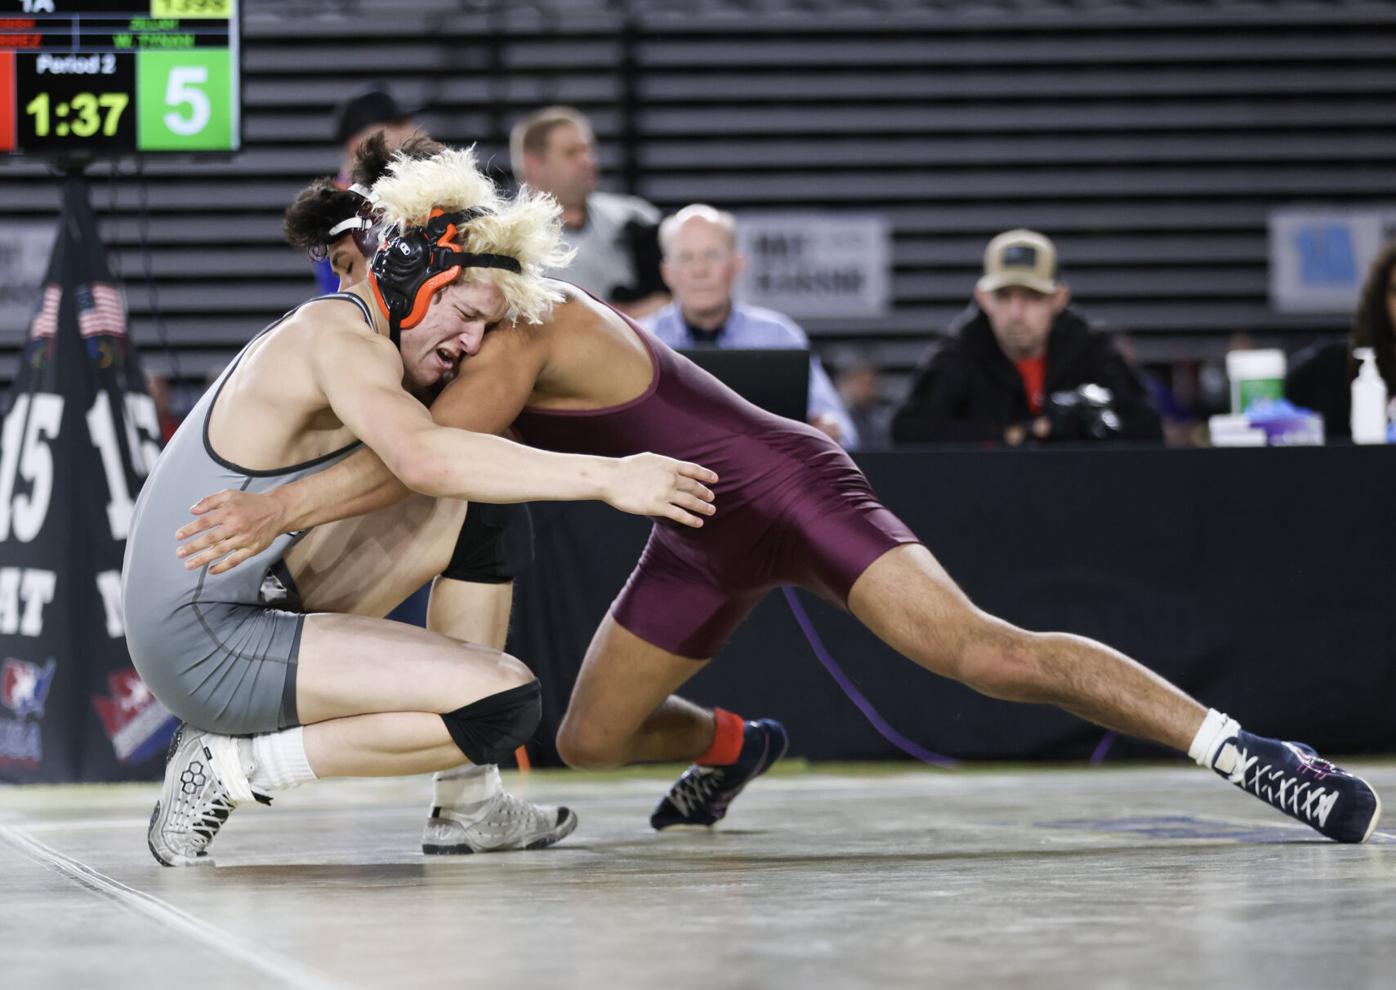 Toppenish boys roll to 4th straight wrestling state title, Zuniga brothers  complete trifecta, Sports